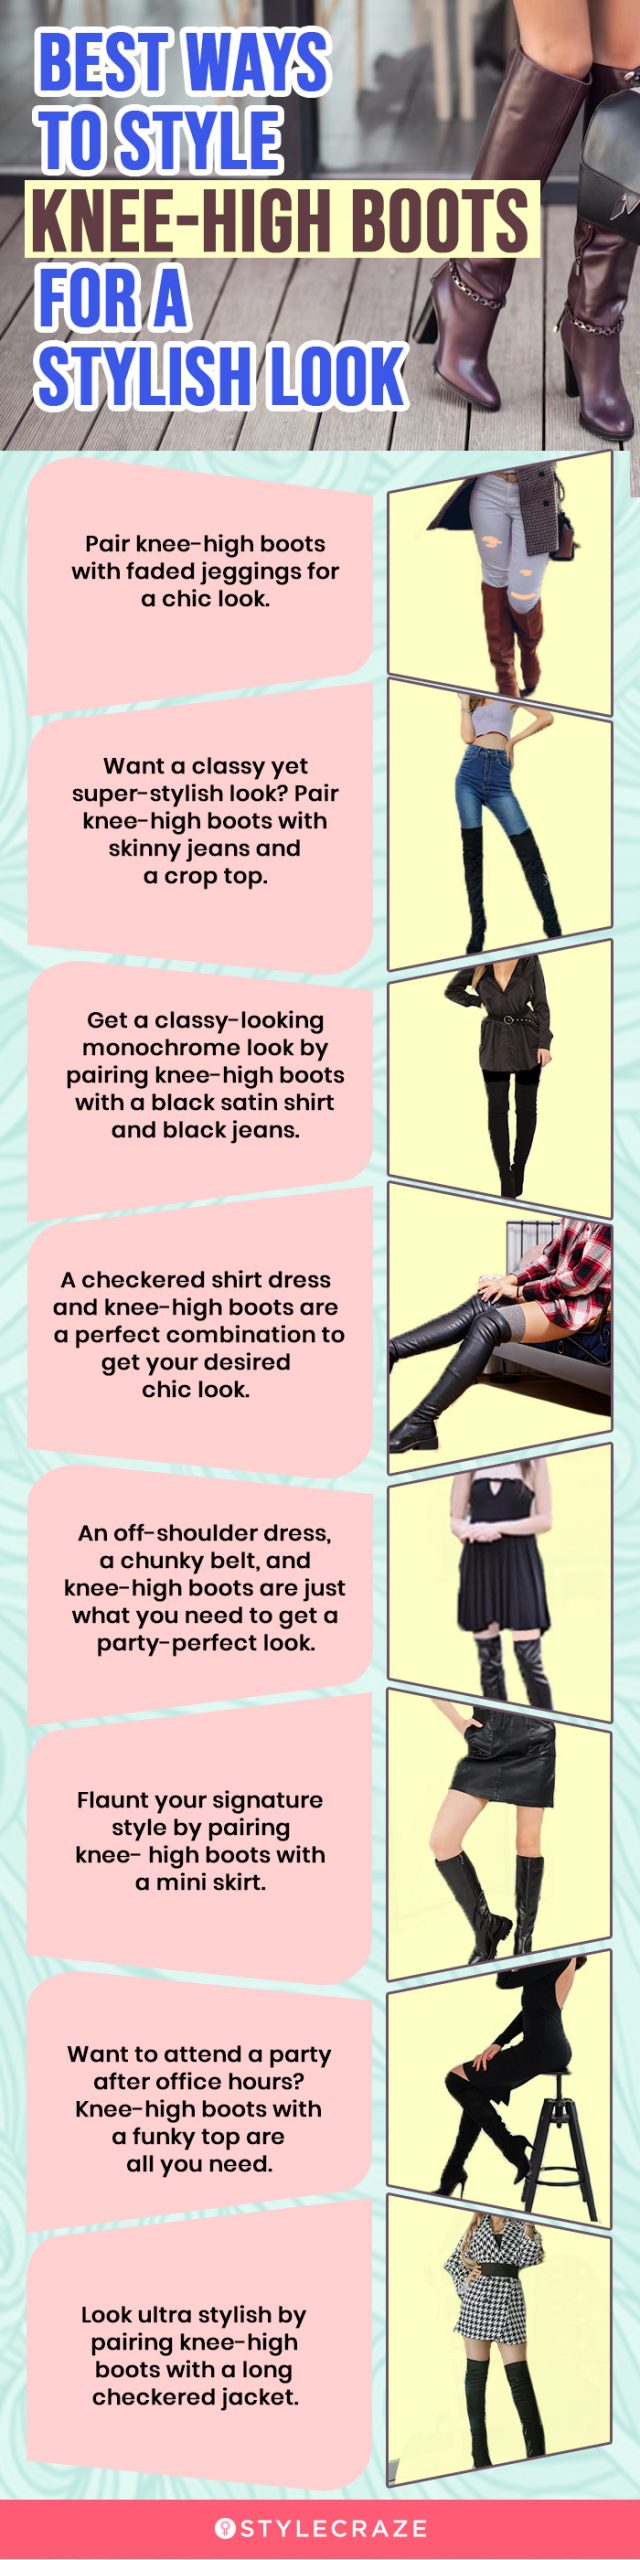 best ways to style knee high boots for a stylish look (infographic)